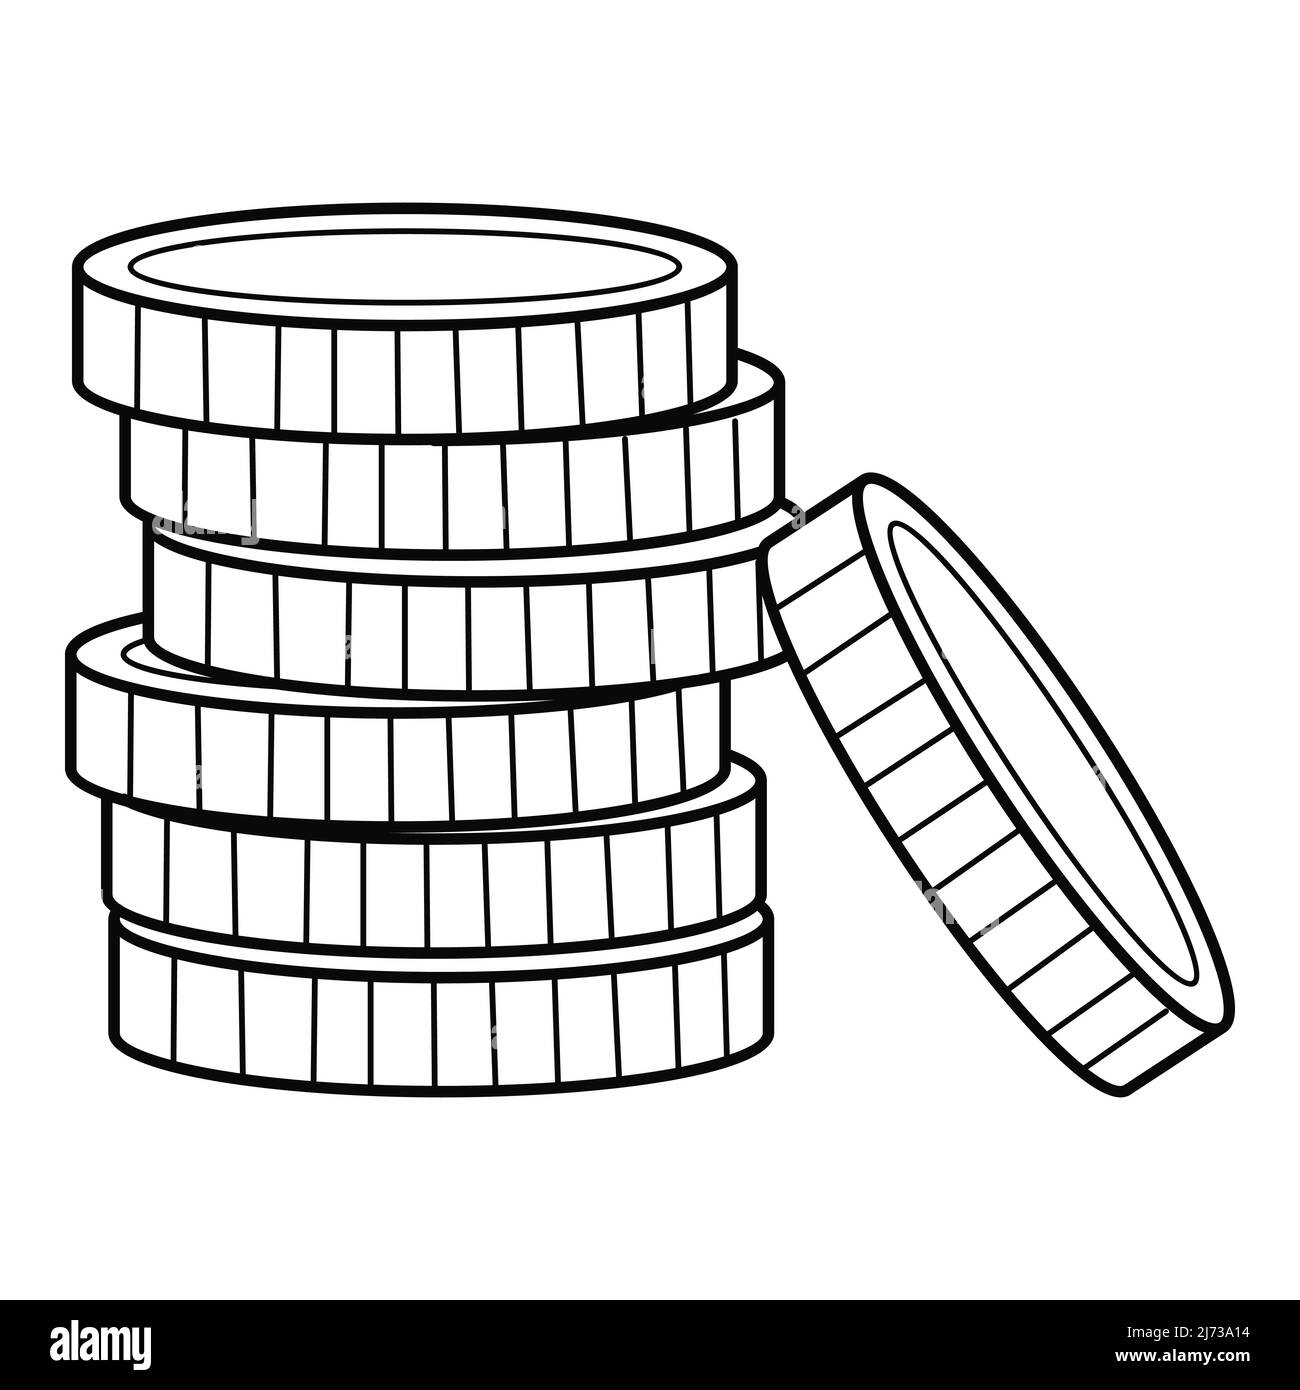 A stack of metal coins, small money, cash, change. The symbol of savings. Linear icon. Hand-drawn black and white vector illustration. Isolated on a w Stock Vector